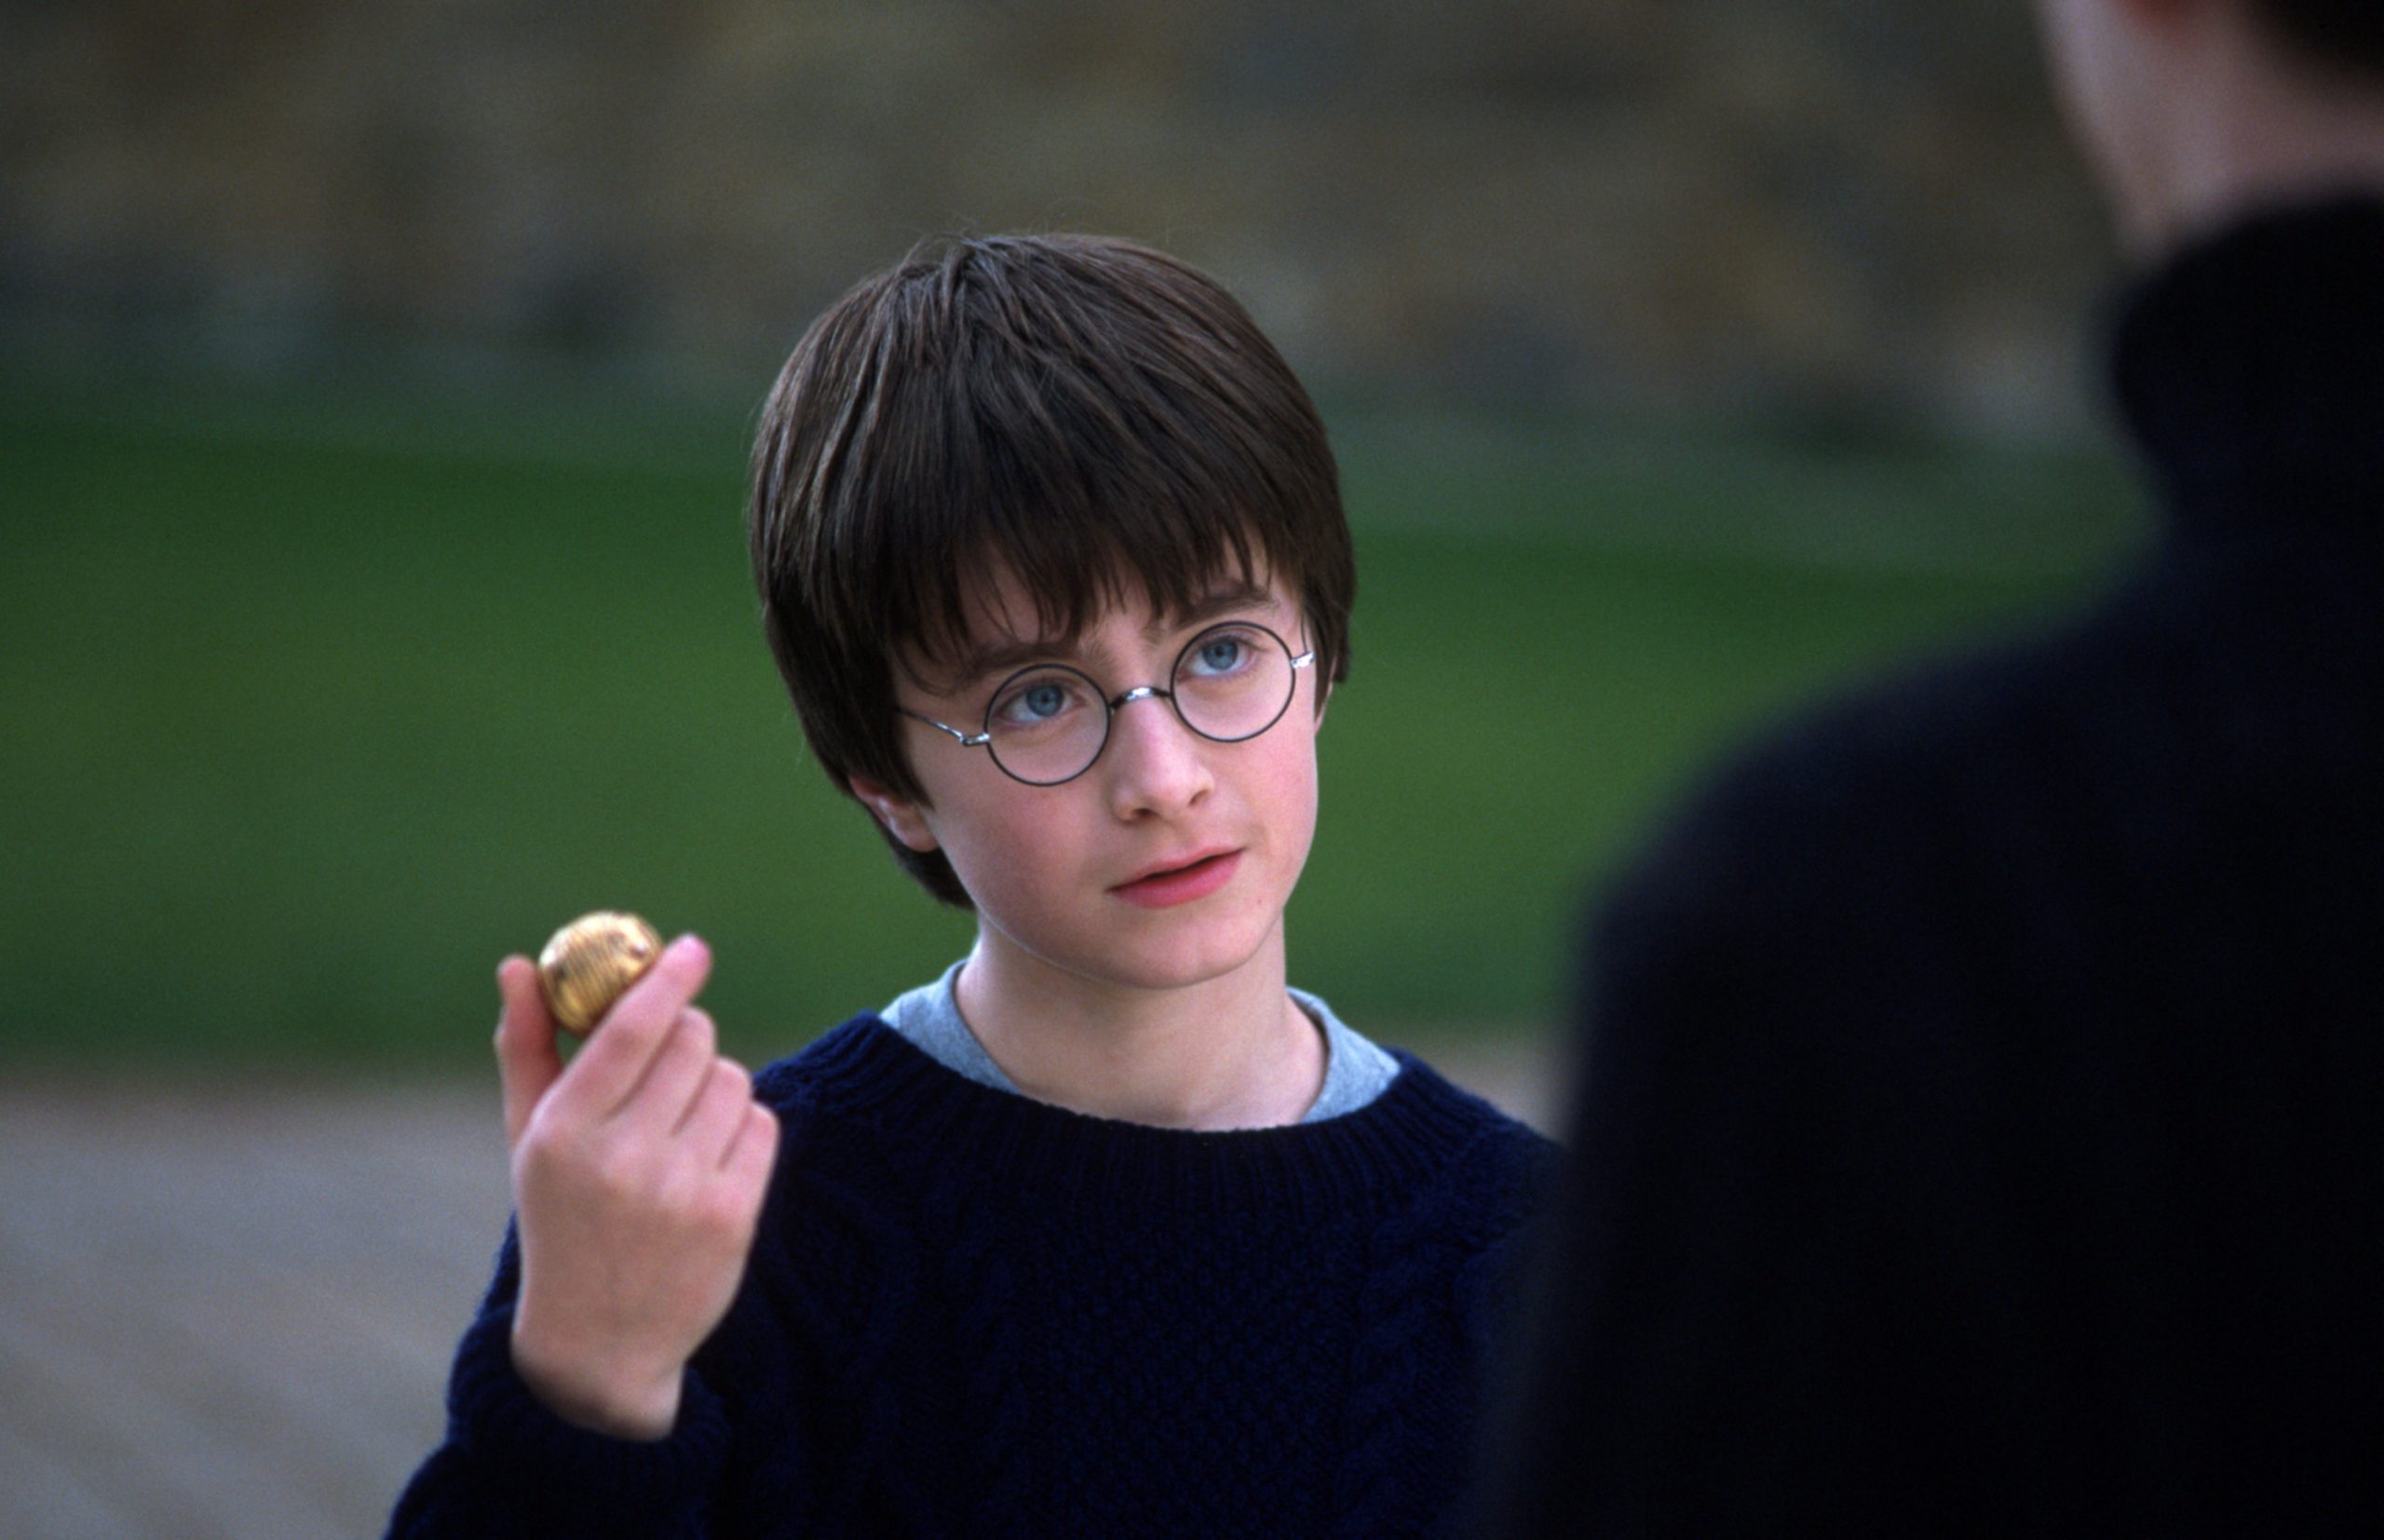 Get deep into Harry potter’s life